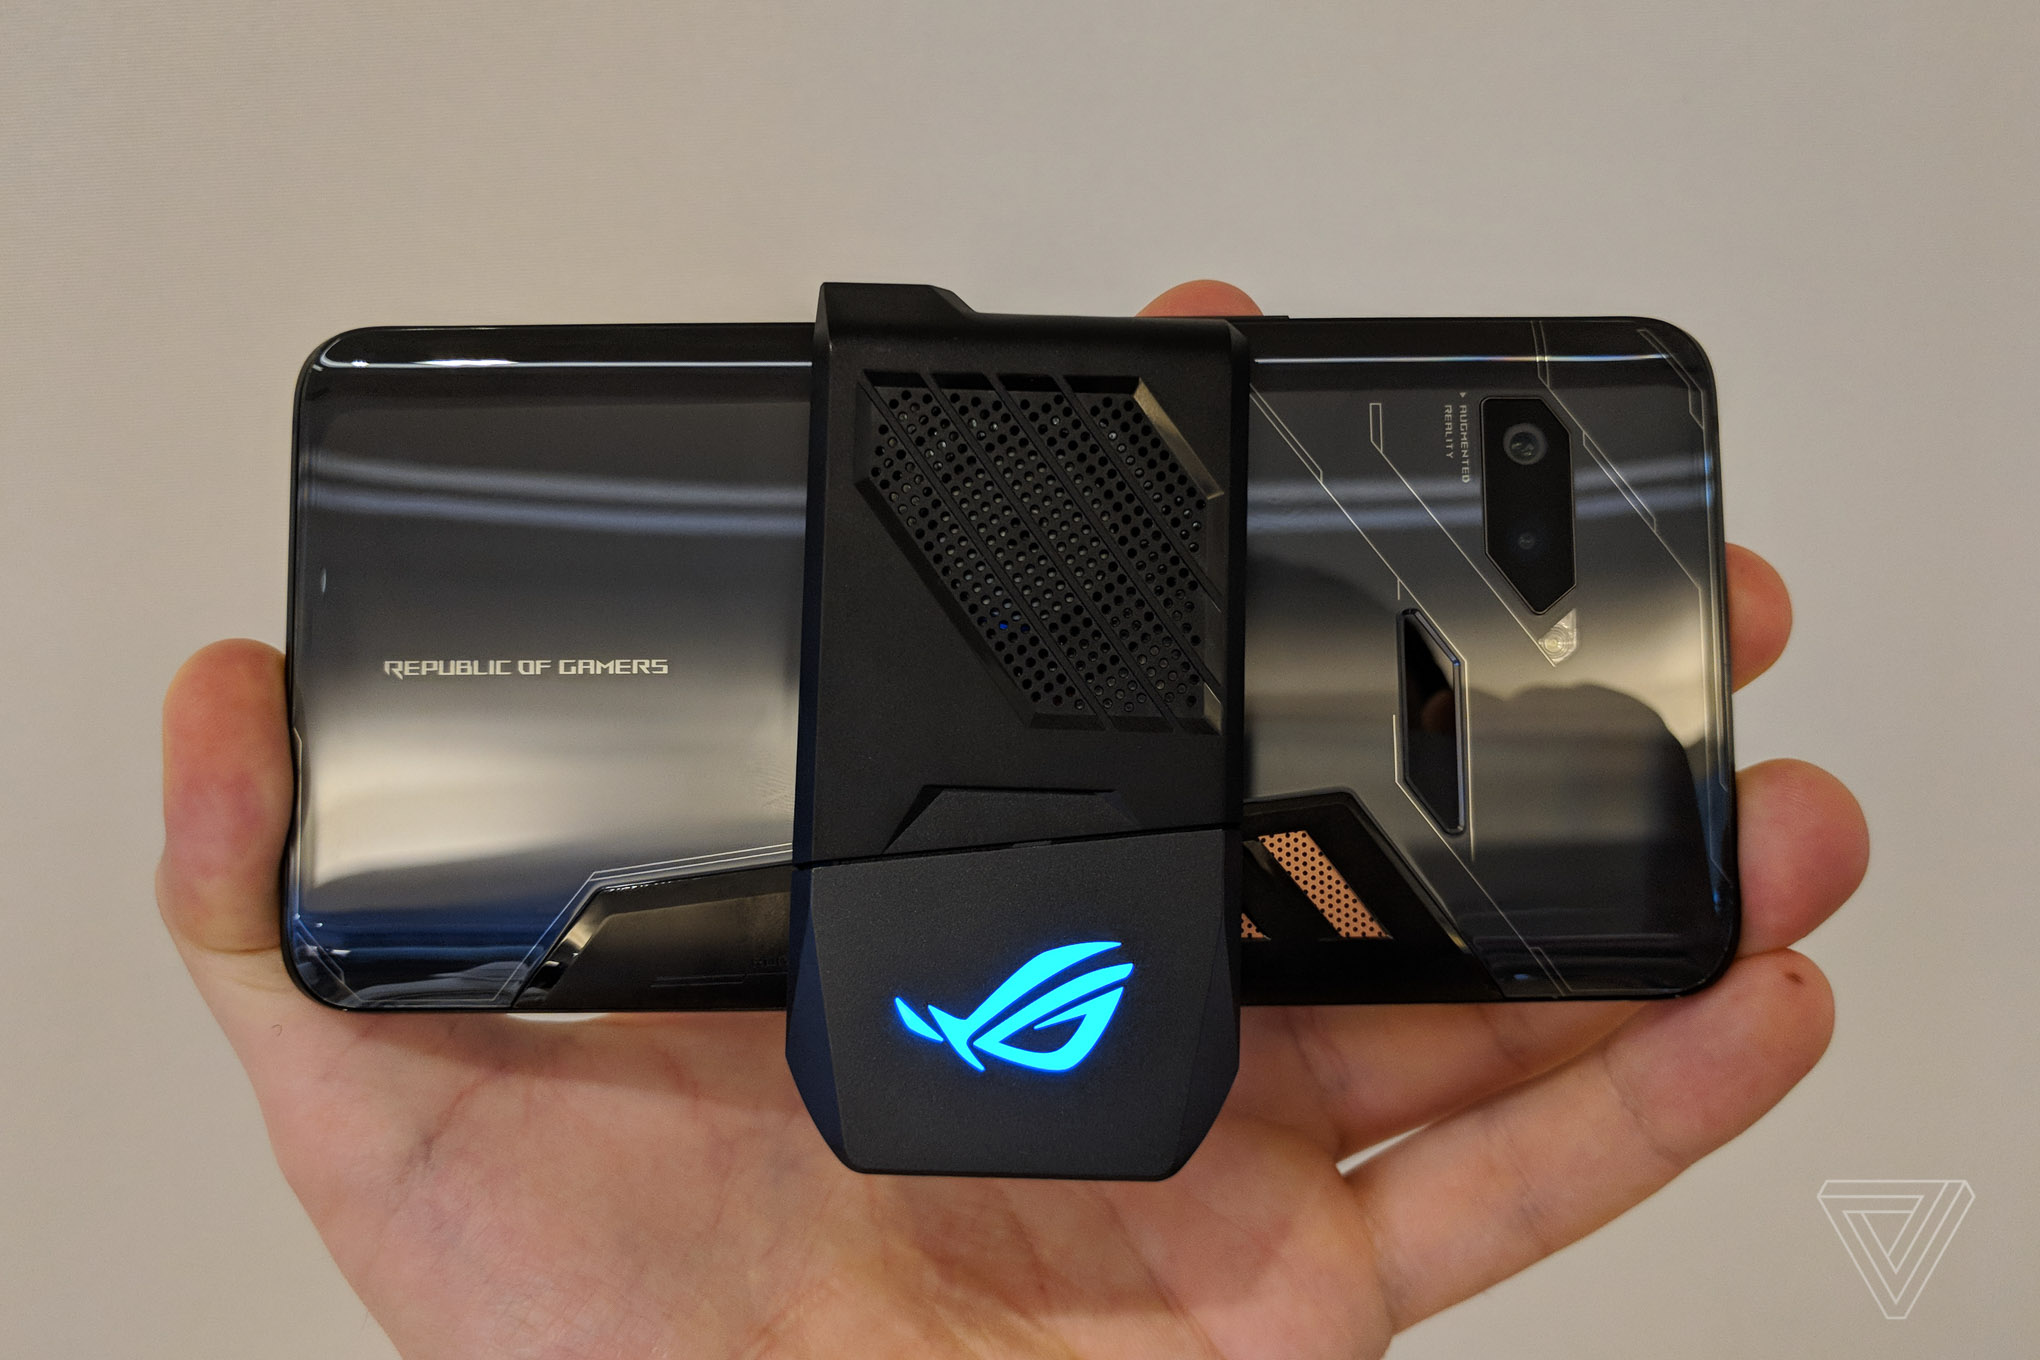 Asus Revealing Its Latest Gaming Smartphone | Newslibre